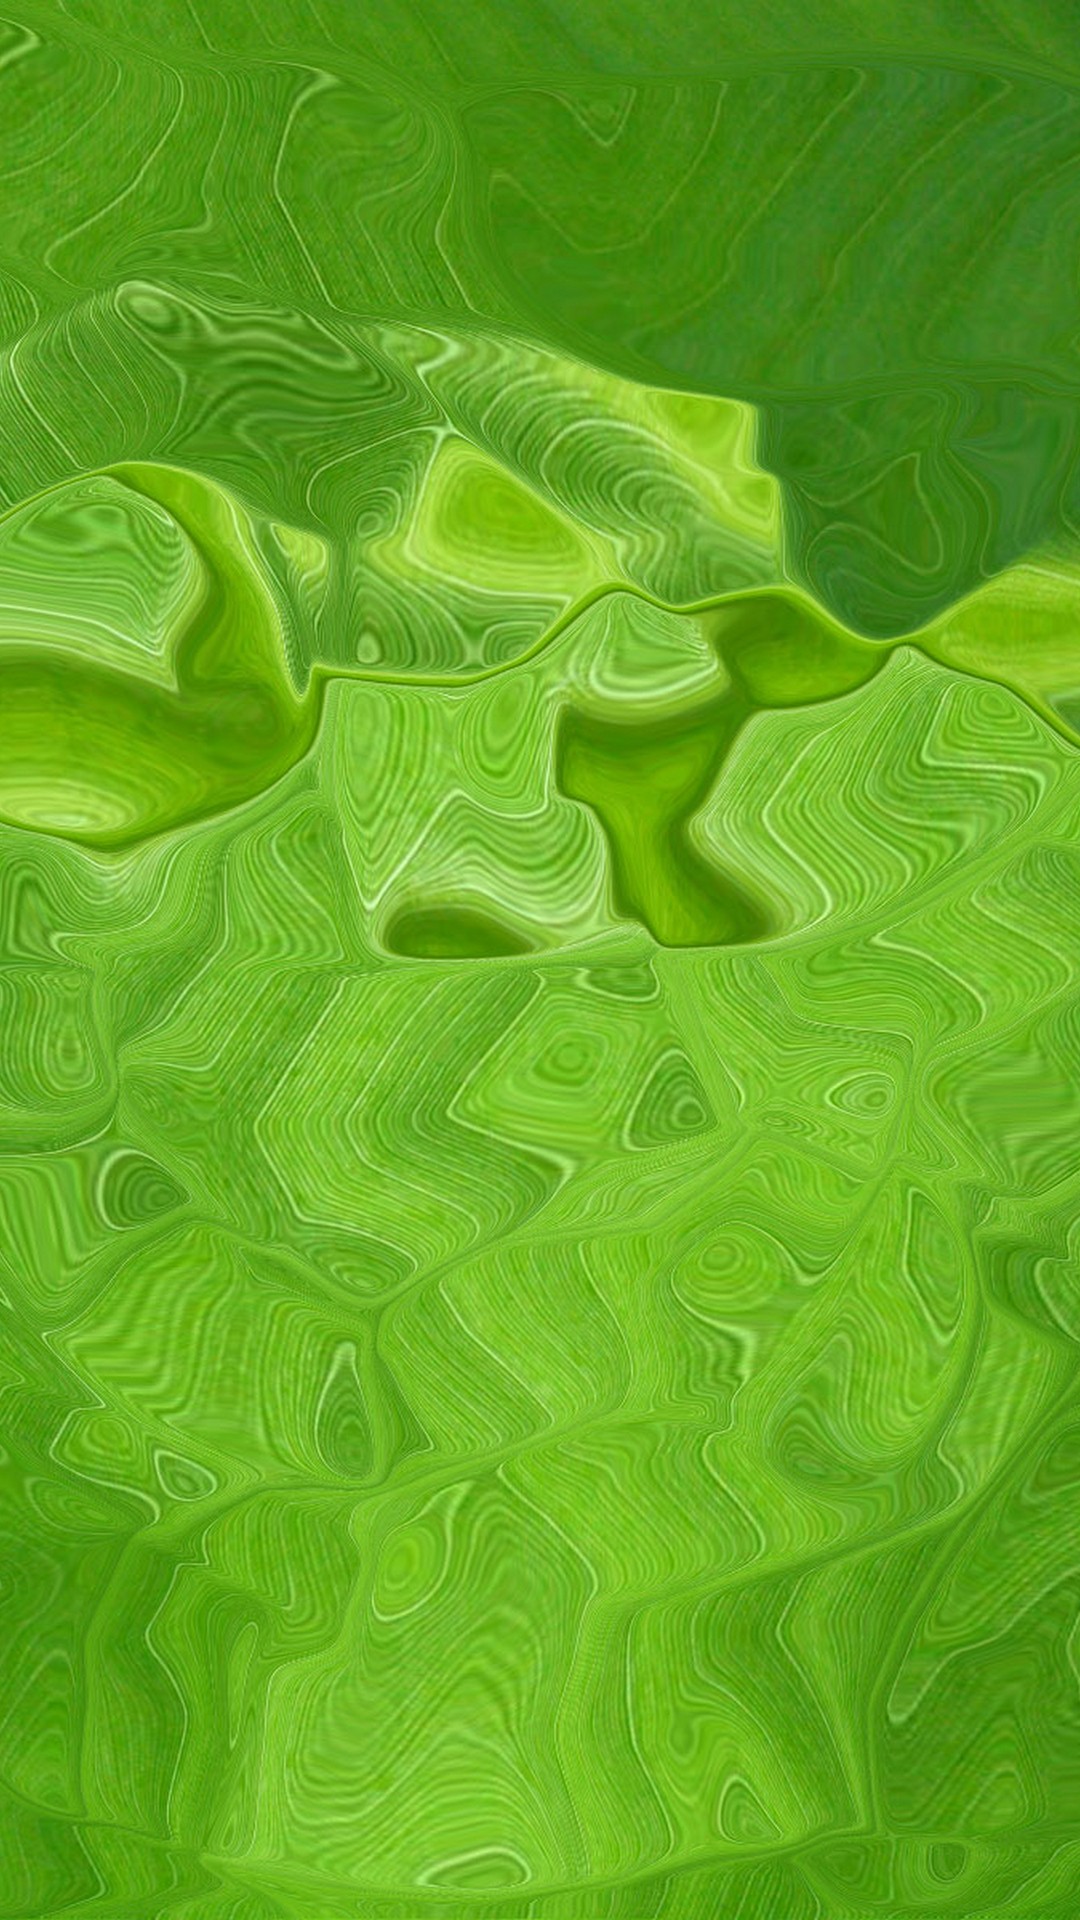 Green Leaf Backgrounds For Android with resolution 1080X1920 pixel. You can make this wallpaper for your Android backgrounds, Tablet, Smartphones Screensavers and Mobile Phone Lock Screen